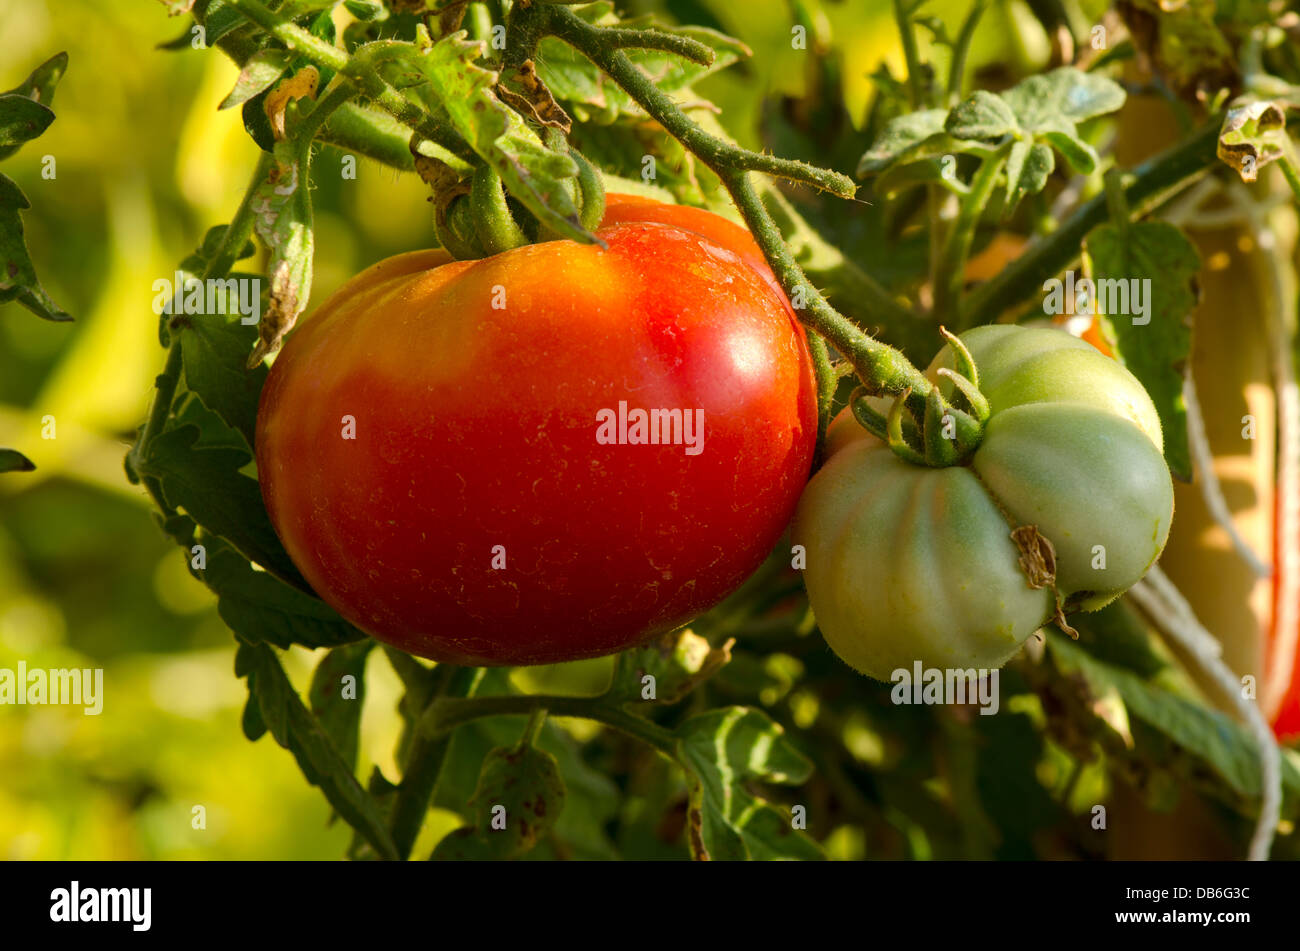 A ripe and unripe tomato on tomato plant held up by dry reed canes, Solanum lycopersicum, Andalusia, Spain. Stock Photo